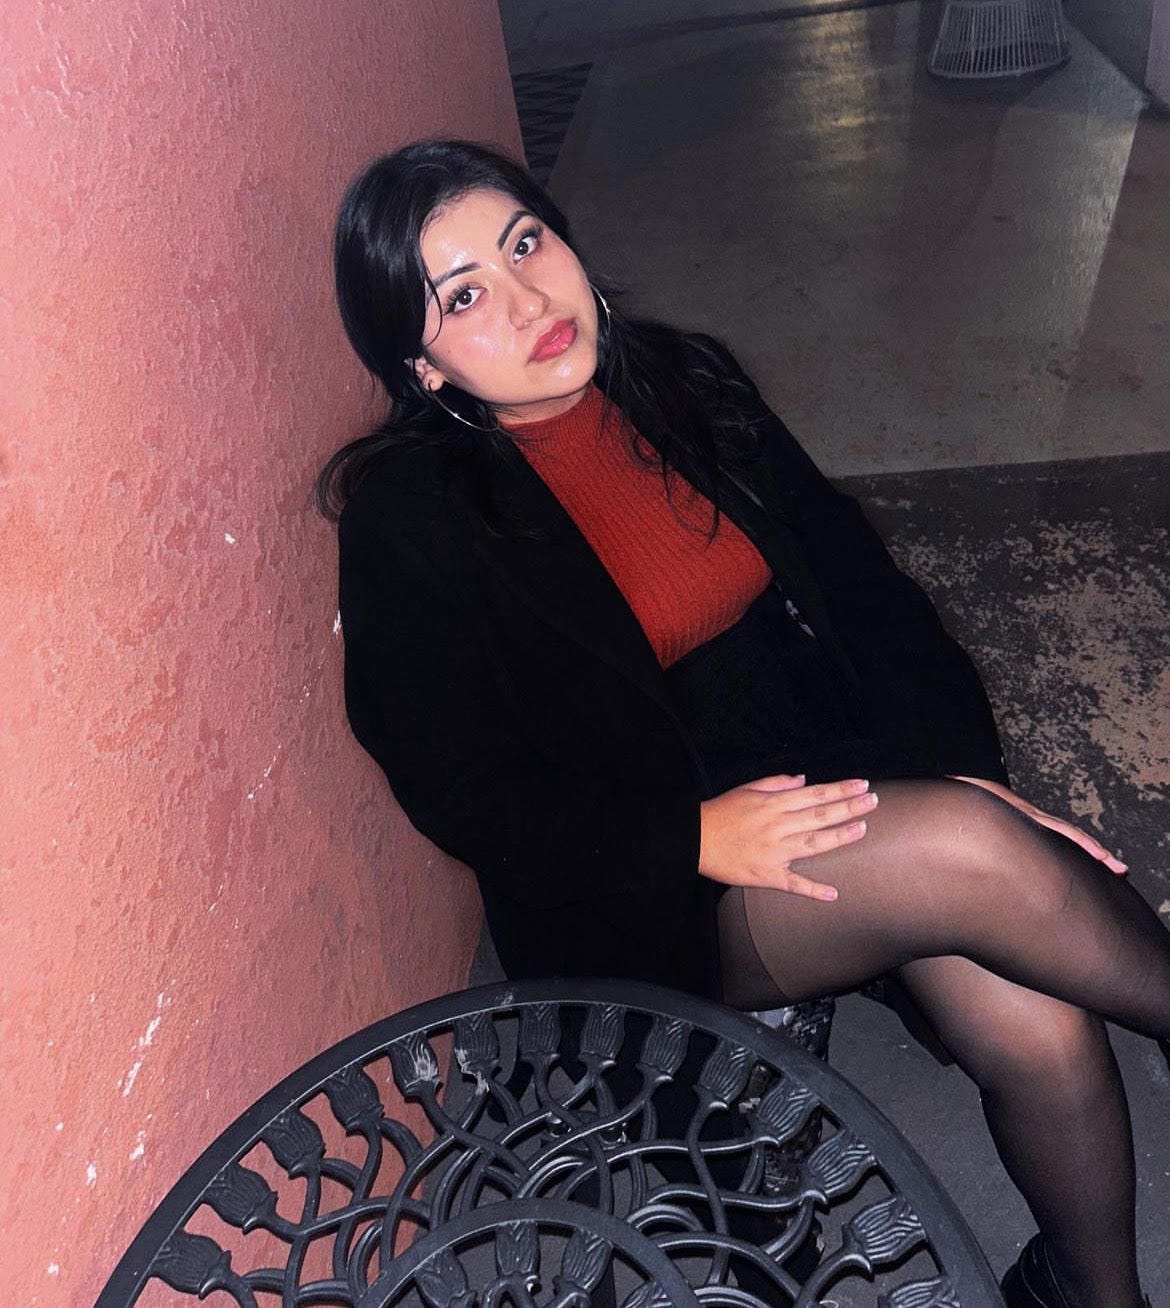 Shelby Silva is sitting outside and leans against a pink wall. She has her legs crossed and she’s wearing a black blazer over a red knit sweater. She wears a black skirt and sheer leggings. There is an iron table next to her.